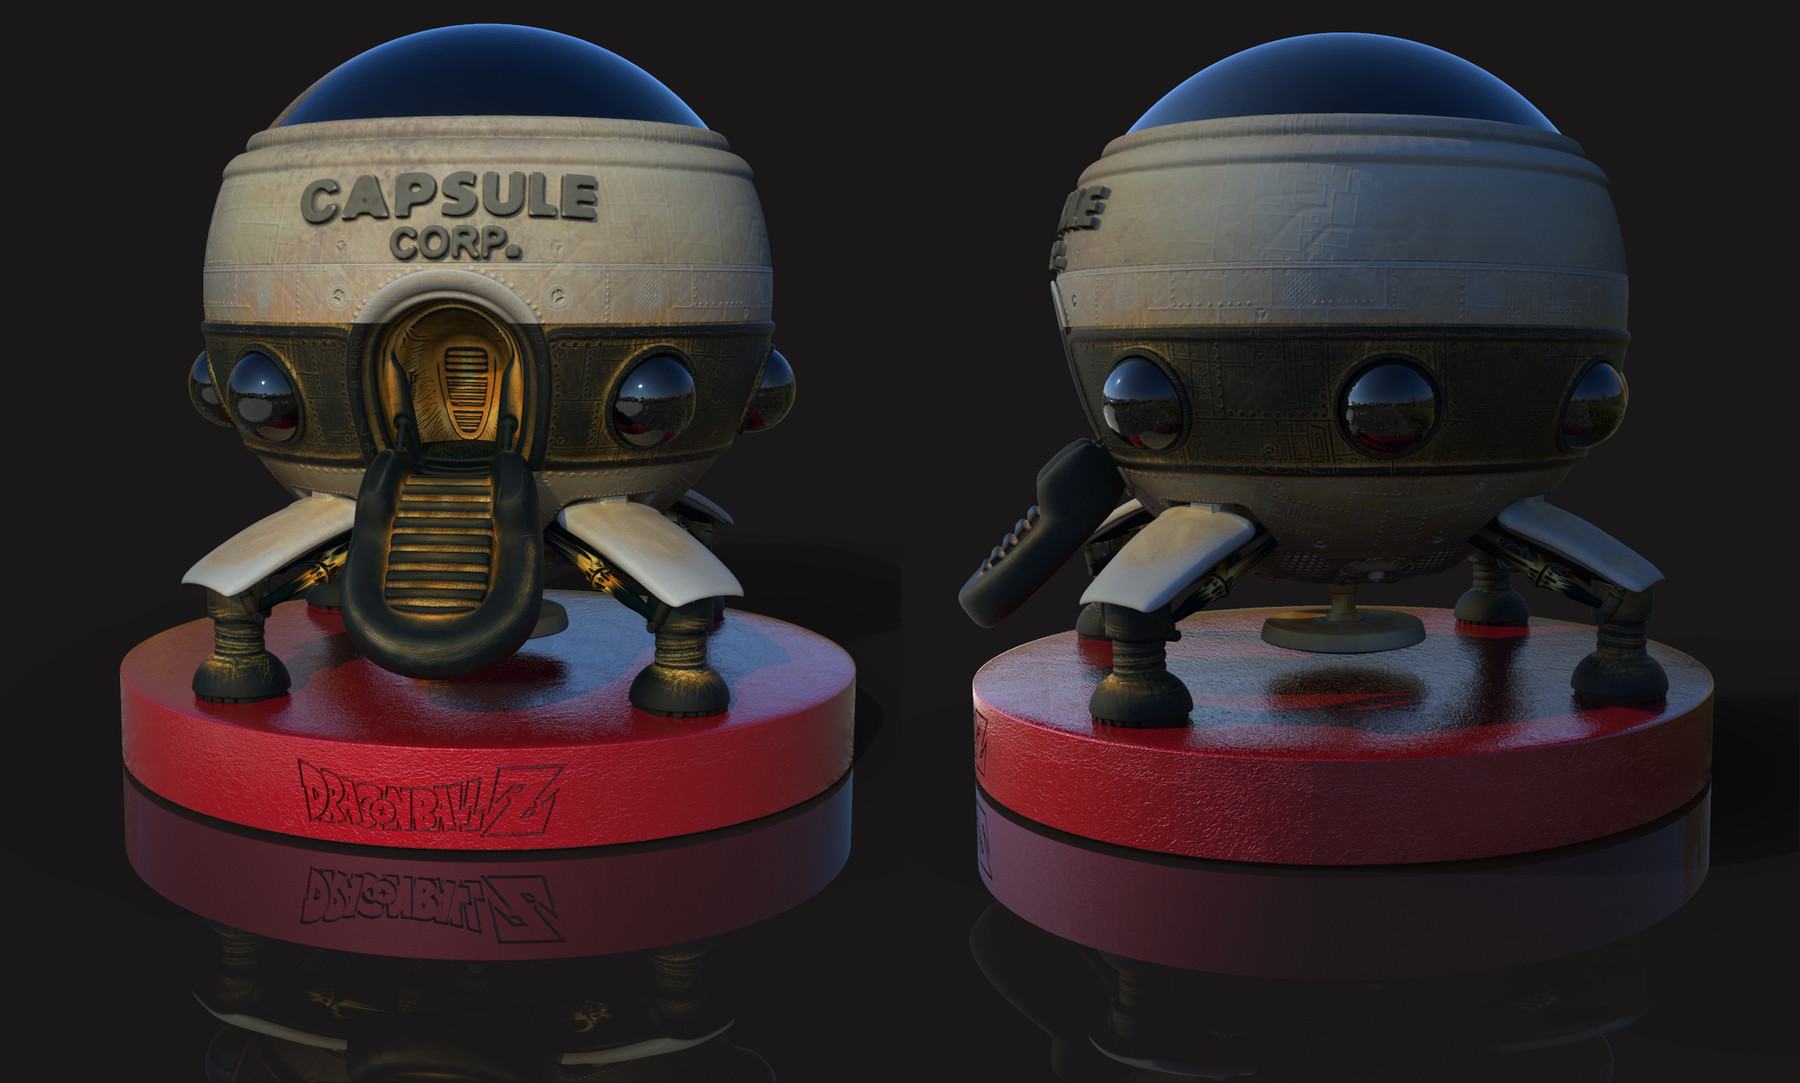 Zbrush capsule download winrar 64 free for windows 7